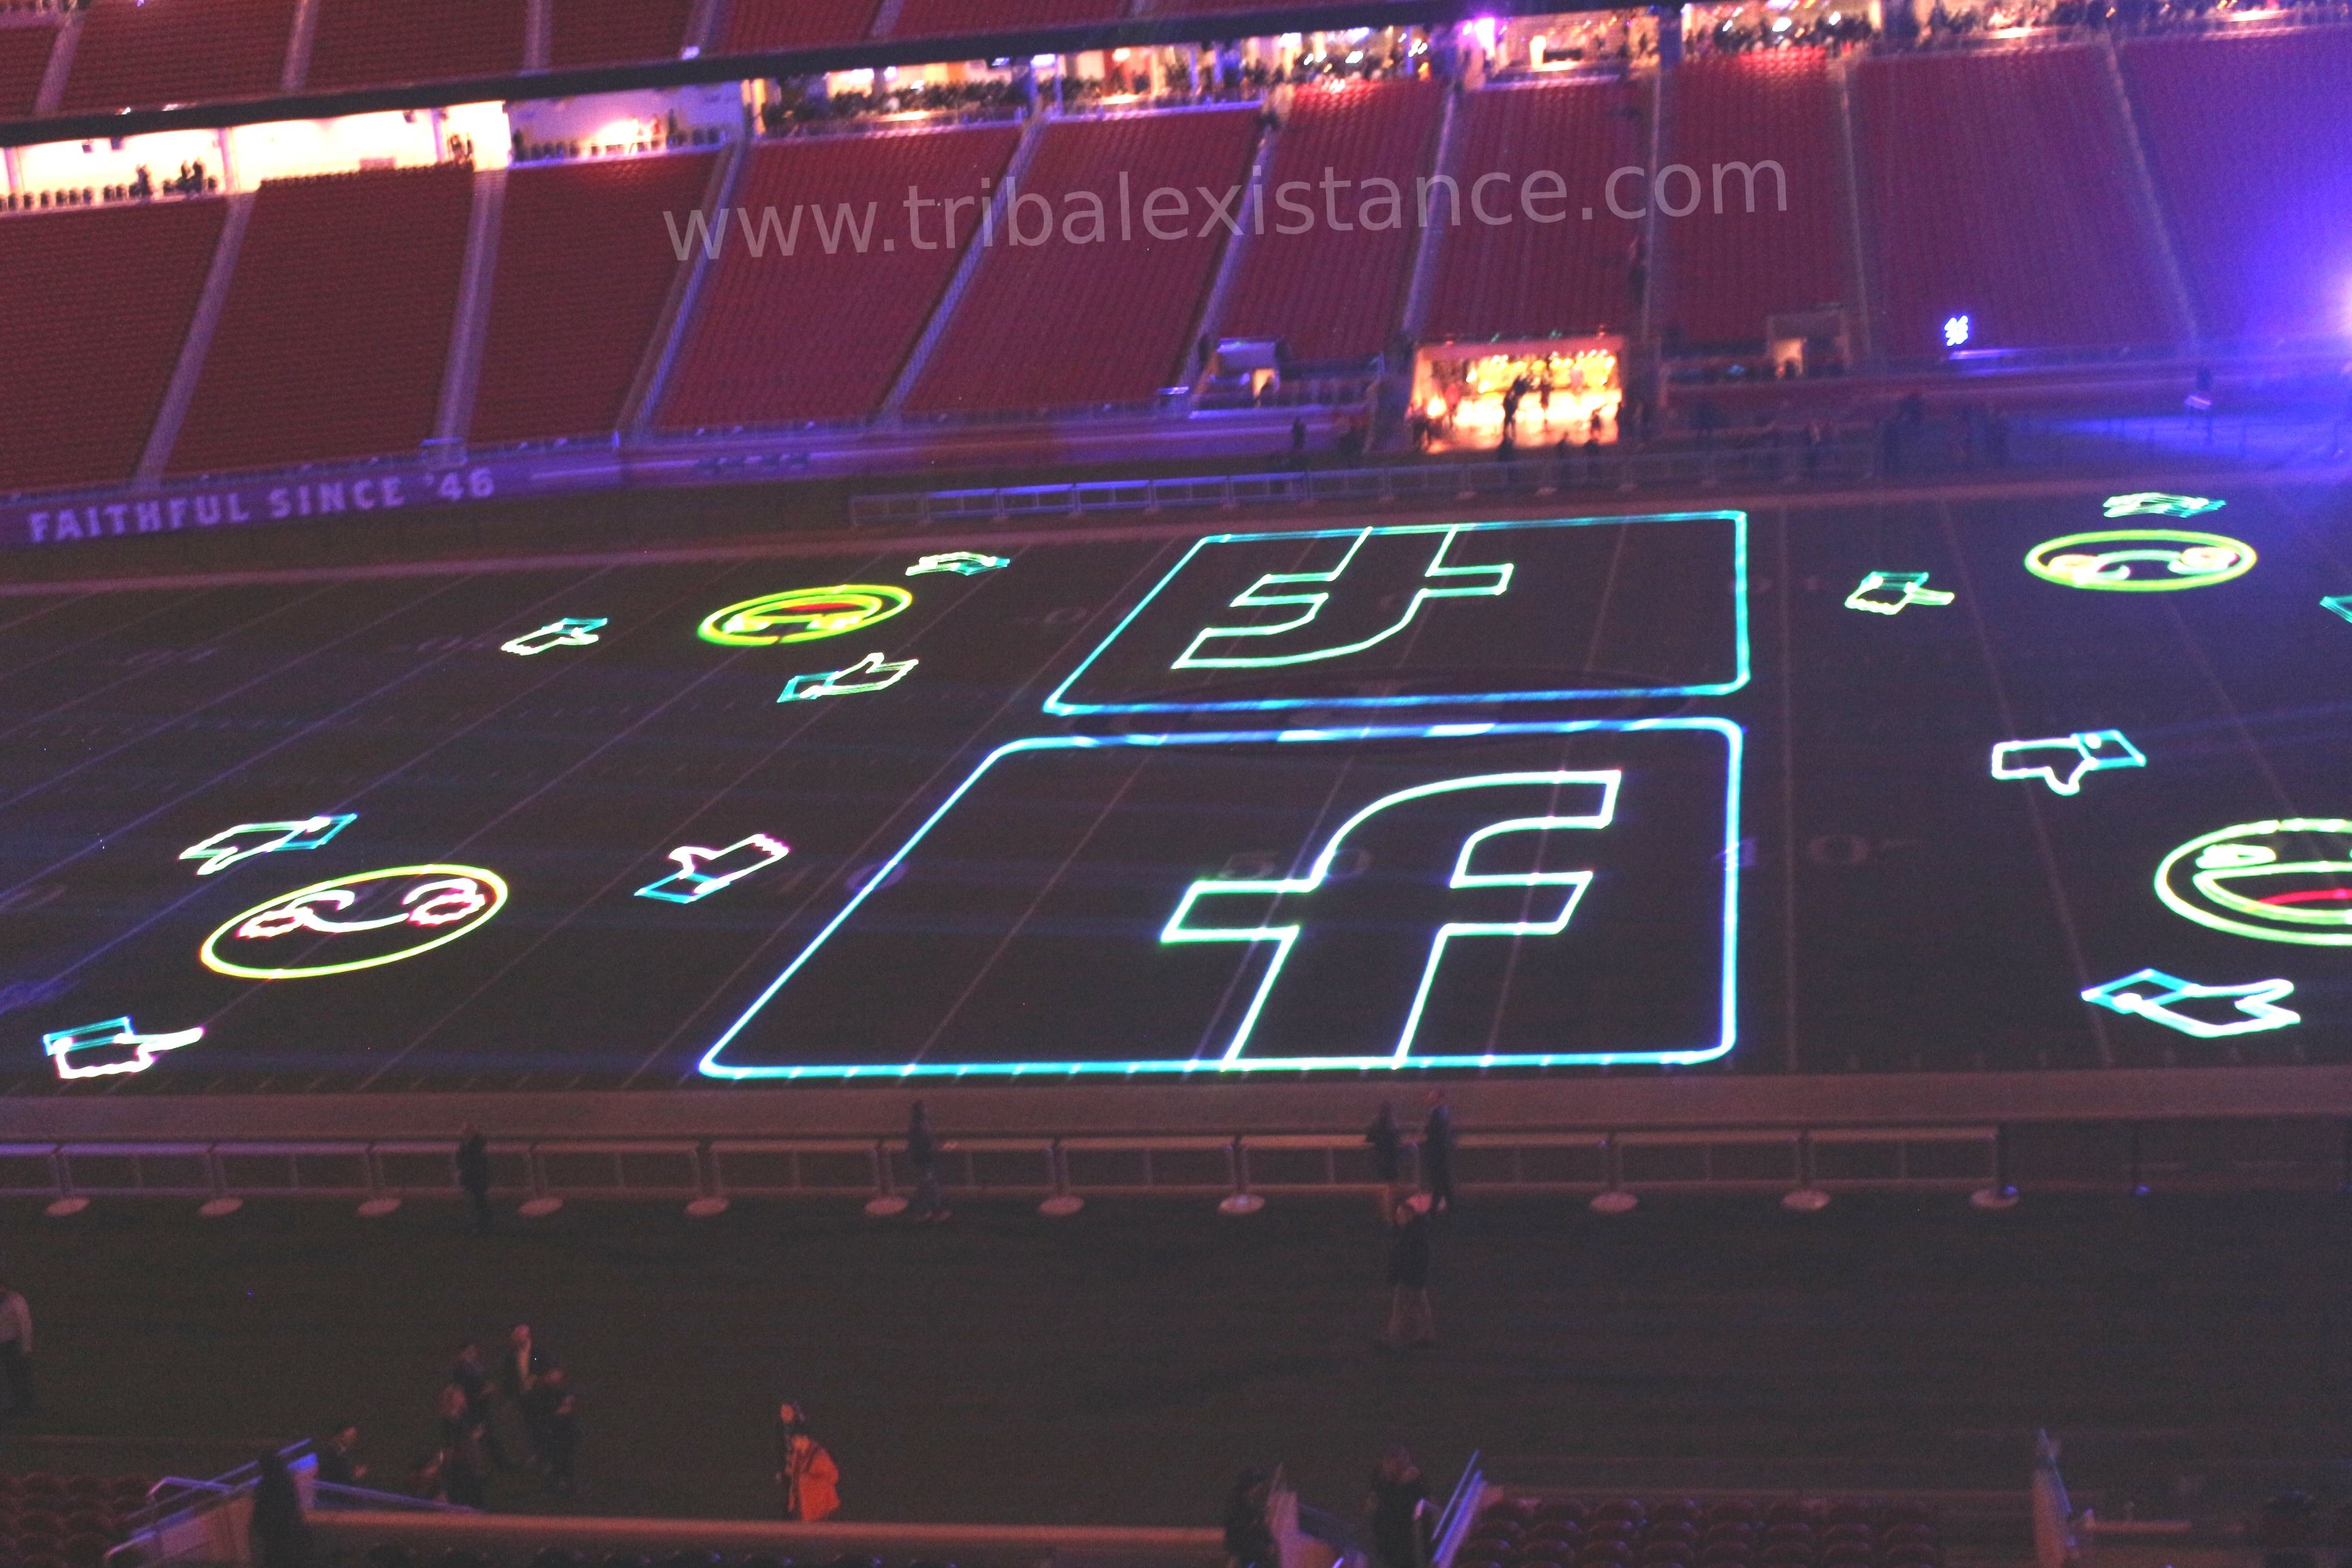 Stadium Laser Graphic Logo Animation Rental Servies Worldwide By Tribal Existance Productions